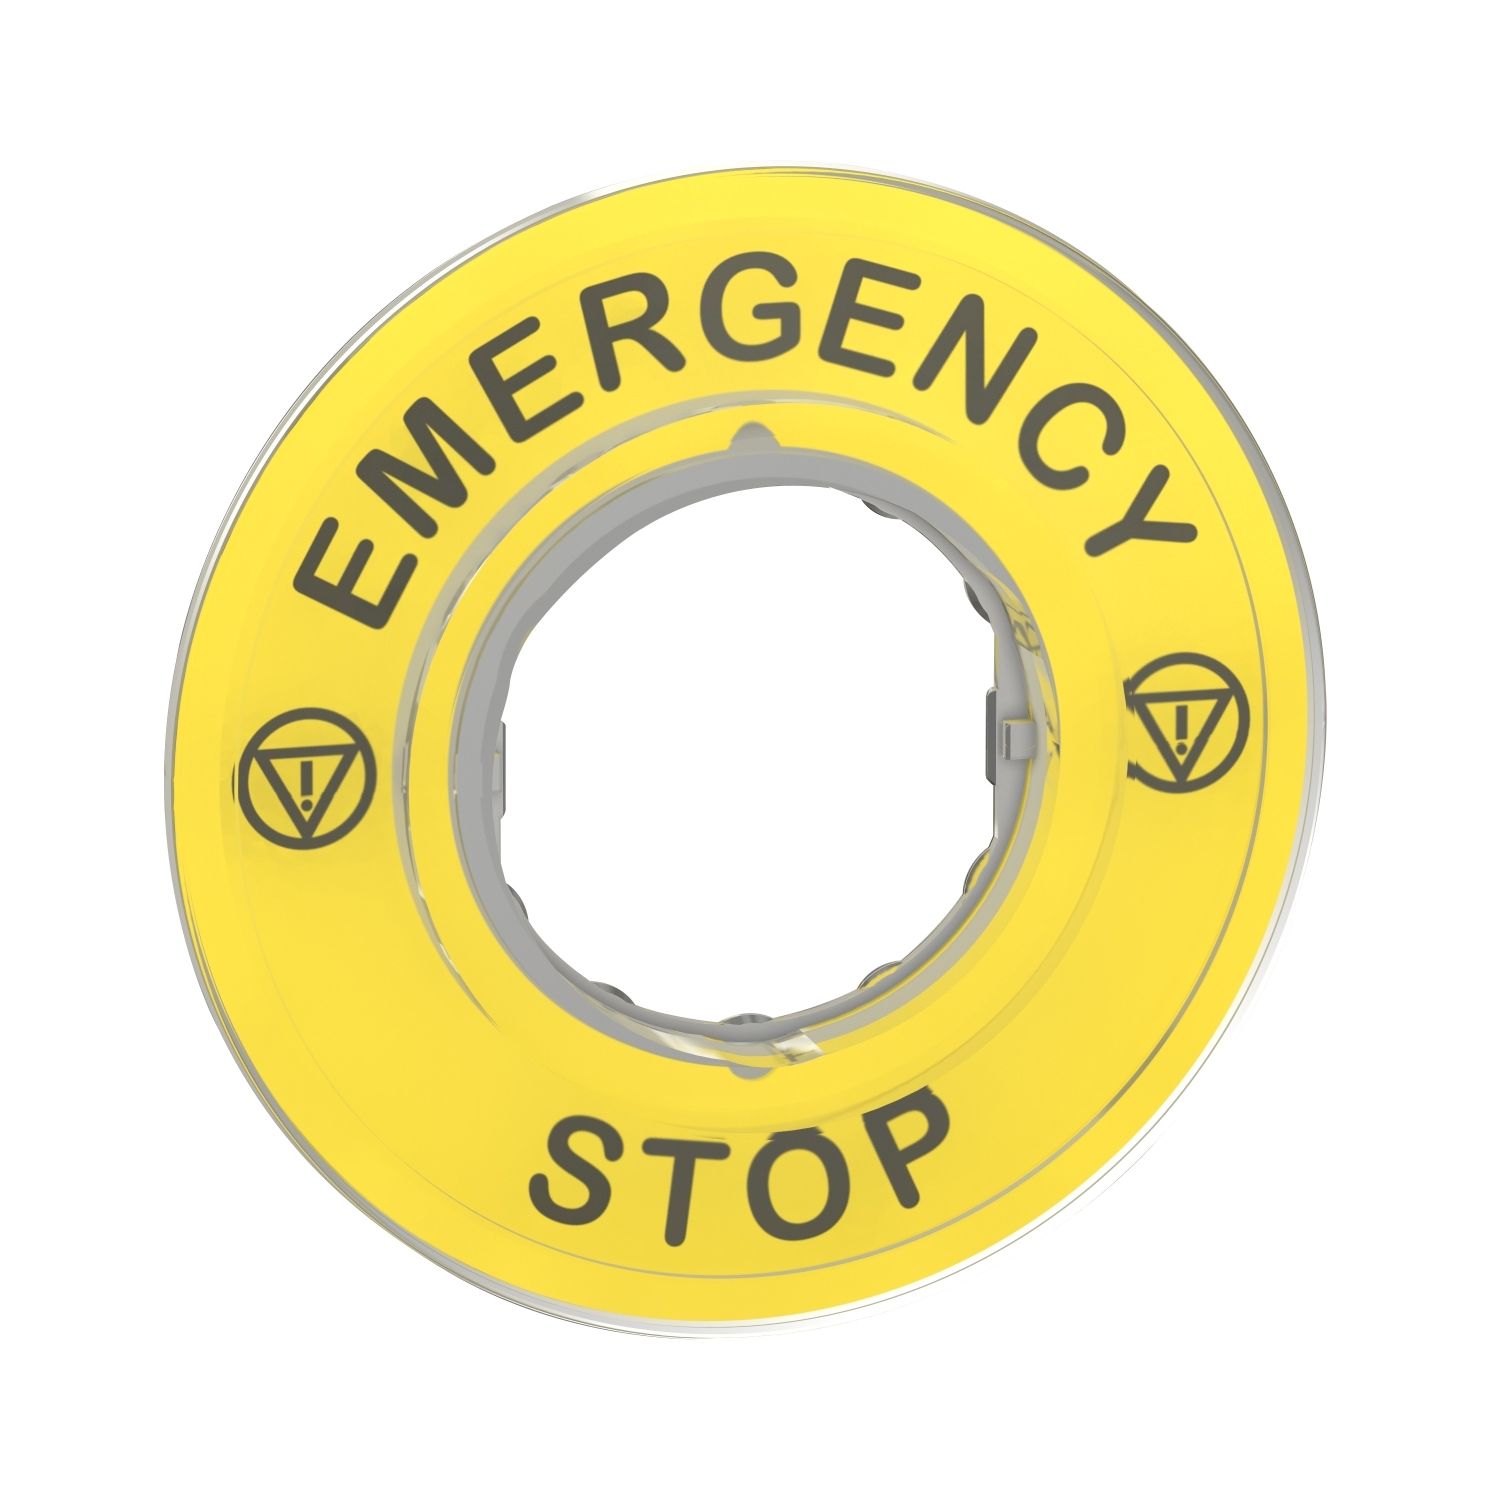 ZBY9320 marked legend Ø60 for emergency stop - EMERGENCY STOP/logo ISO13850